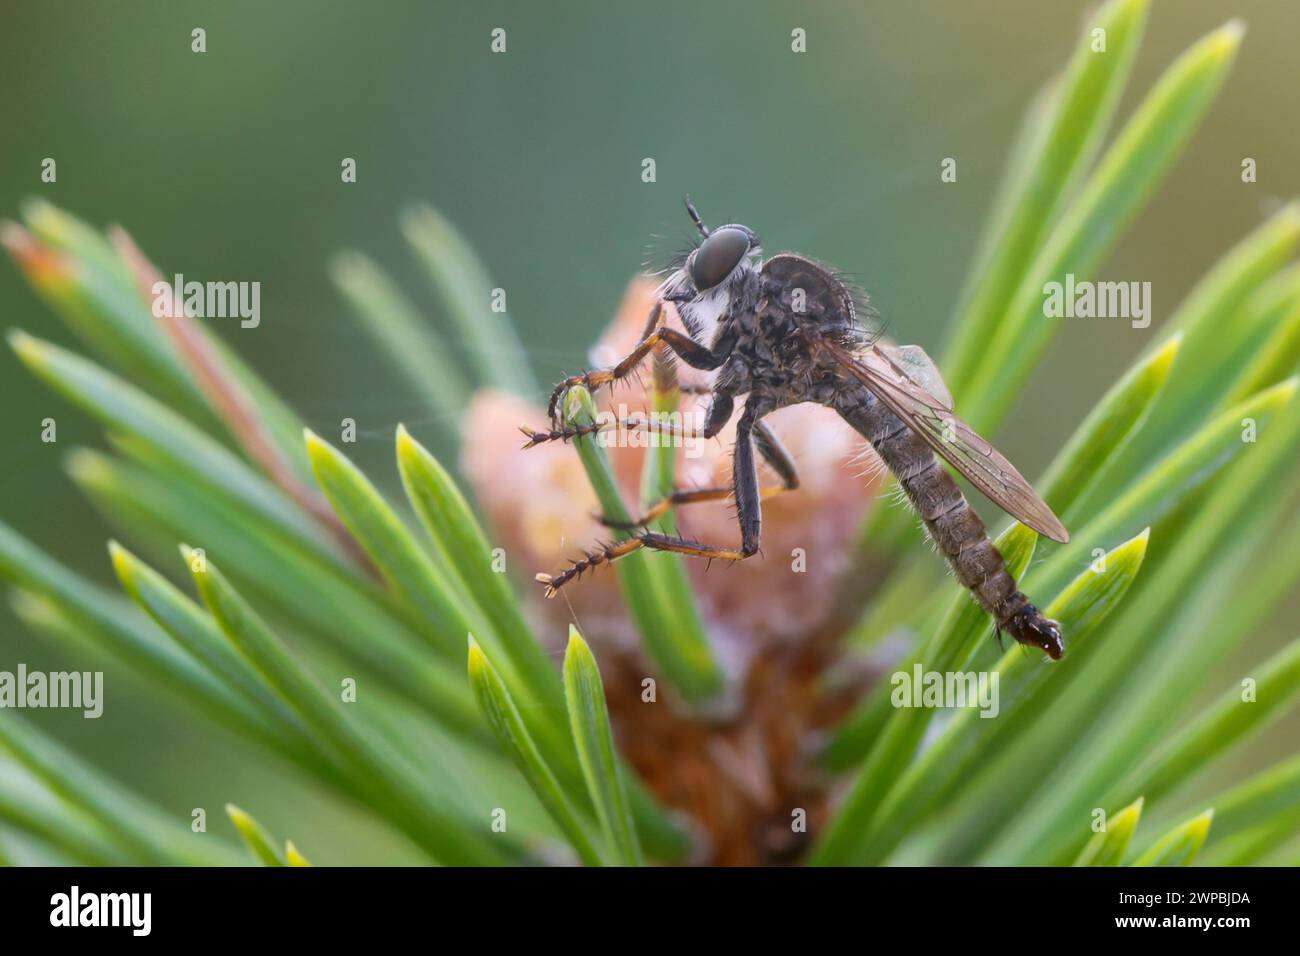 Common Robber Fly (Tolmerus atricapillus, Machimus atricapillus), Male sits on pine needles, Germany Stock Photo